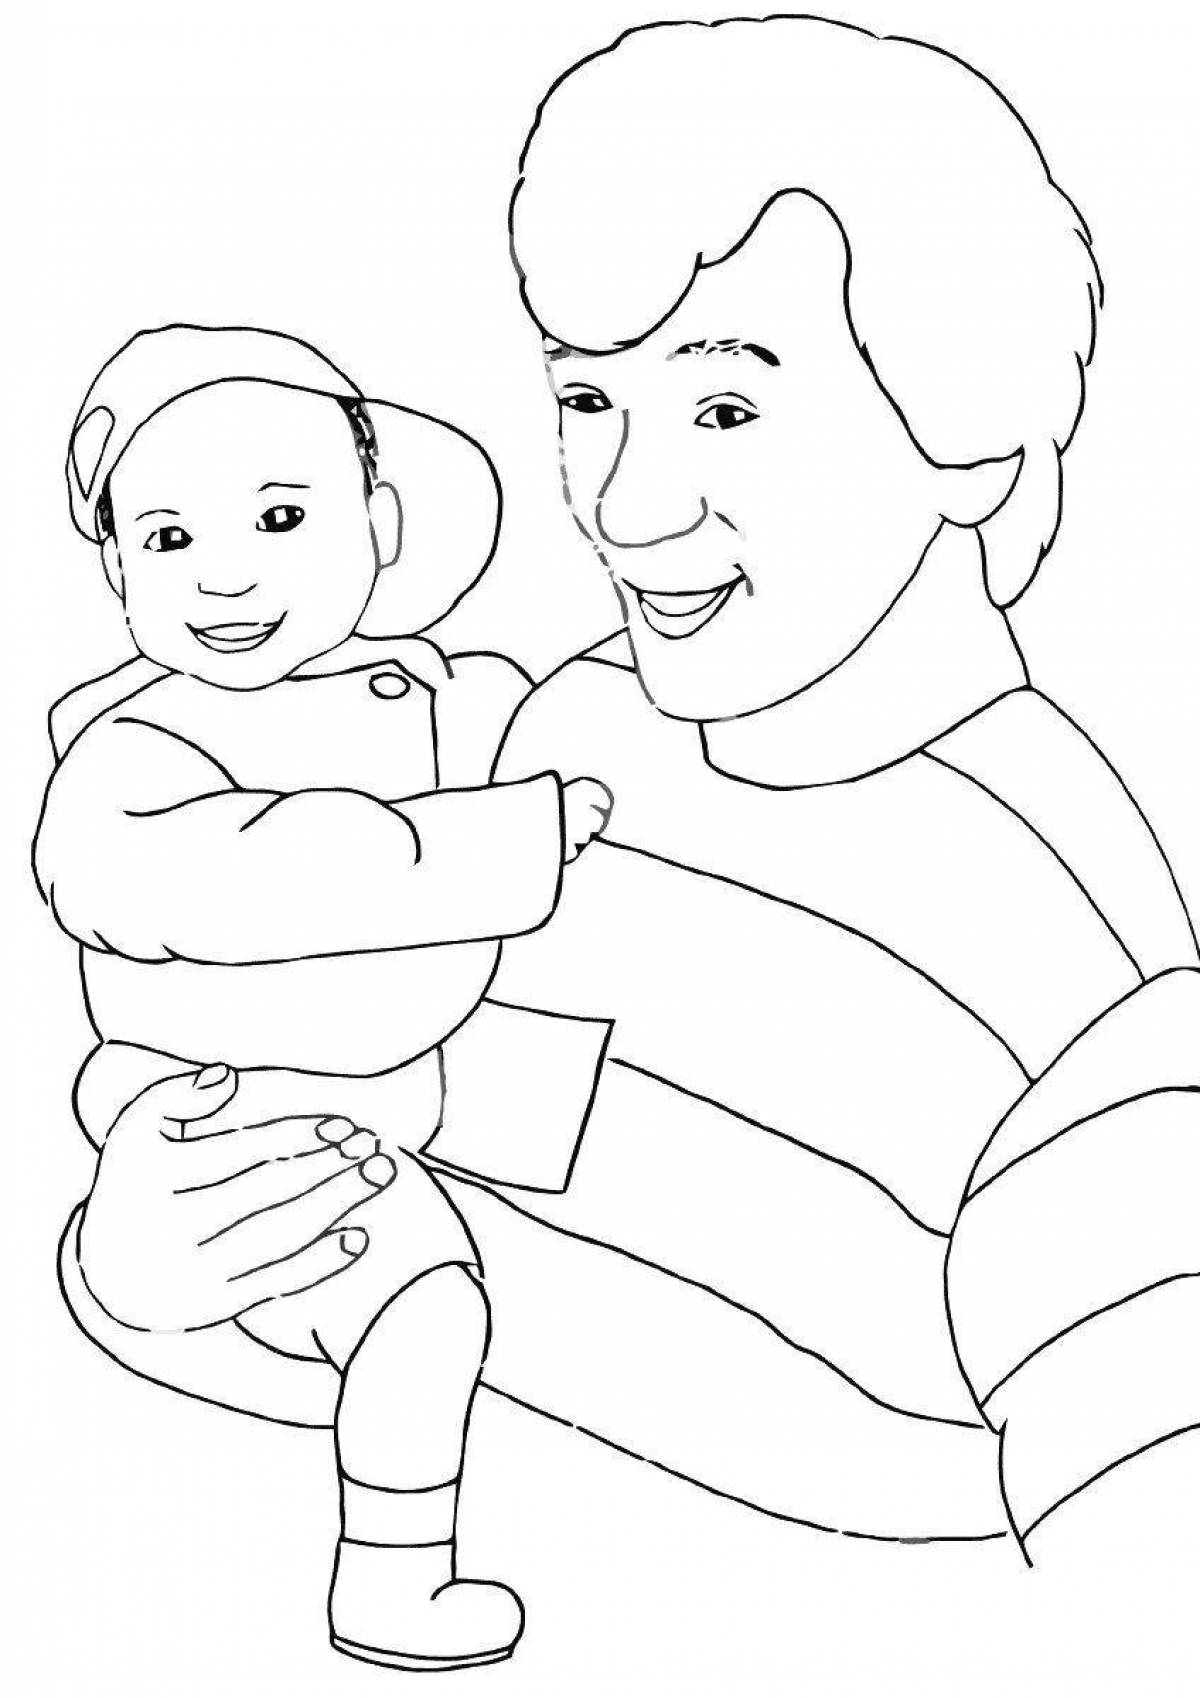 Jackie chan animated coloring book